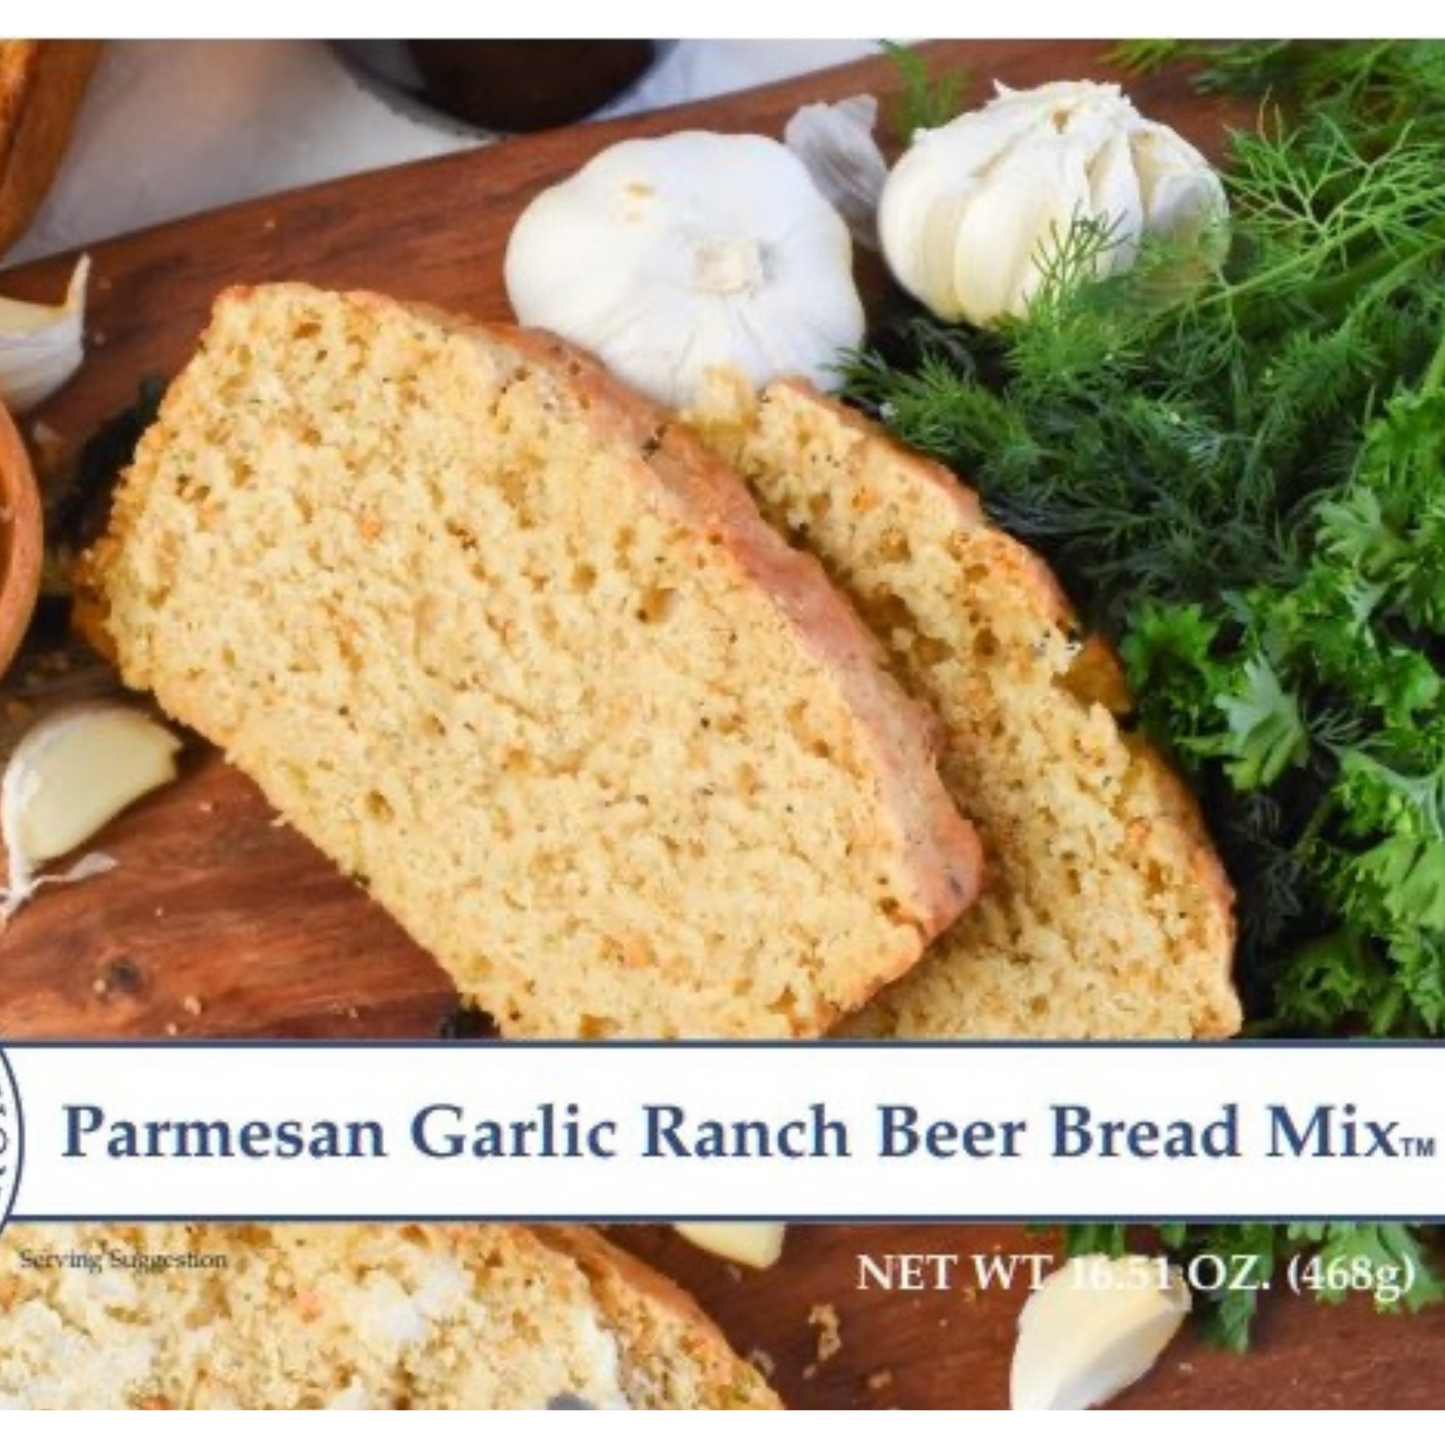 Get ready to indulge in a mouthwatering treat with our Parmesan Garlic Ranch Beer Bread! Made with savory parmesan cheese, zesty garlic, and flavorful ranch, this hearty bread will warm your heart and fill your tummy with its irresistible taste and aroma. The best part? Beer brings out the bread's rustic taste. Perfect for game nights, a compliment to soup or bbq, or even just as a snack, our beer bread is a sure hit for all ages